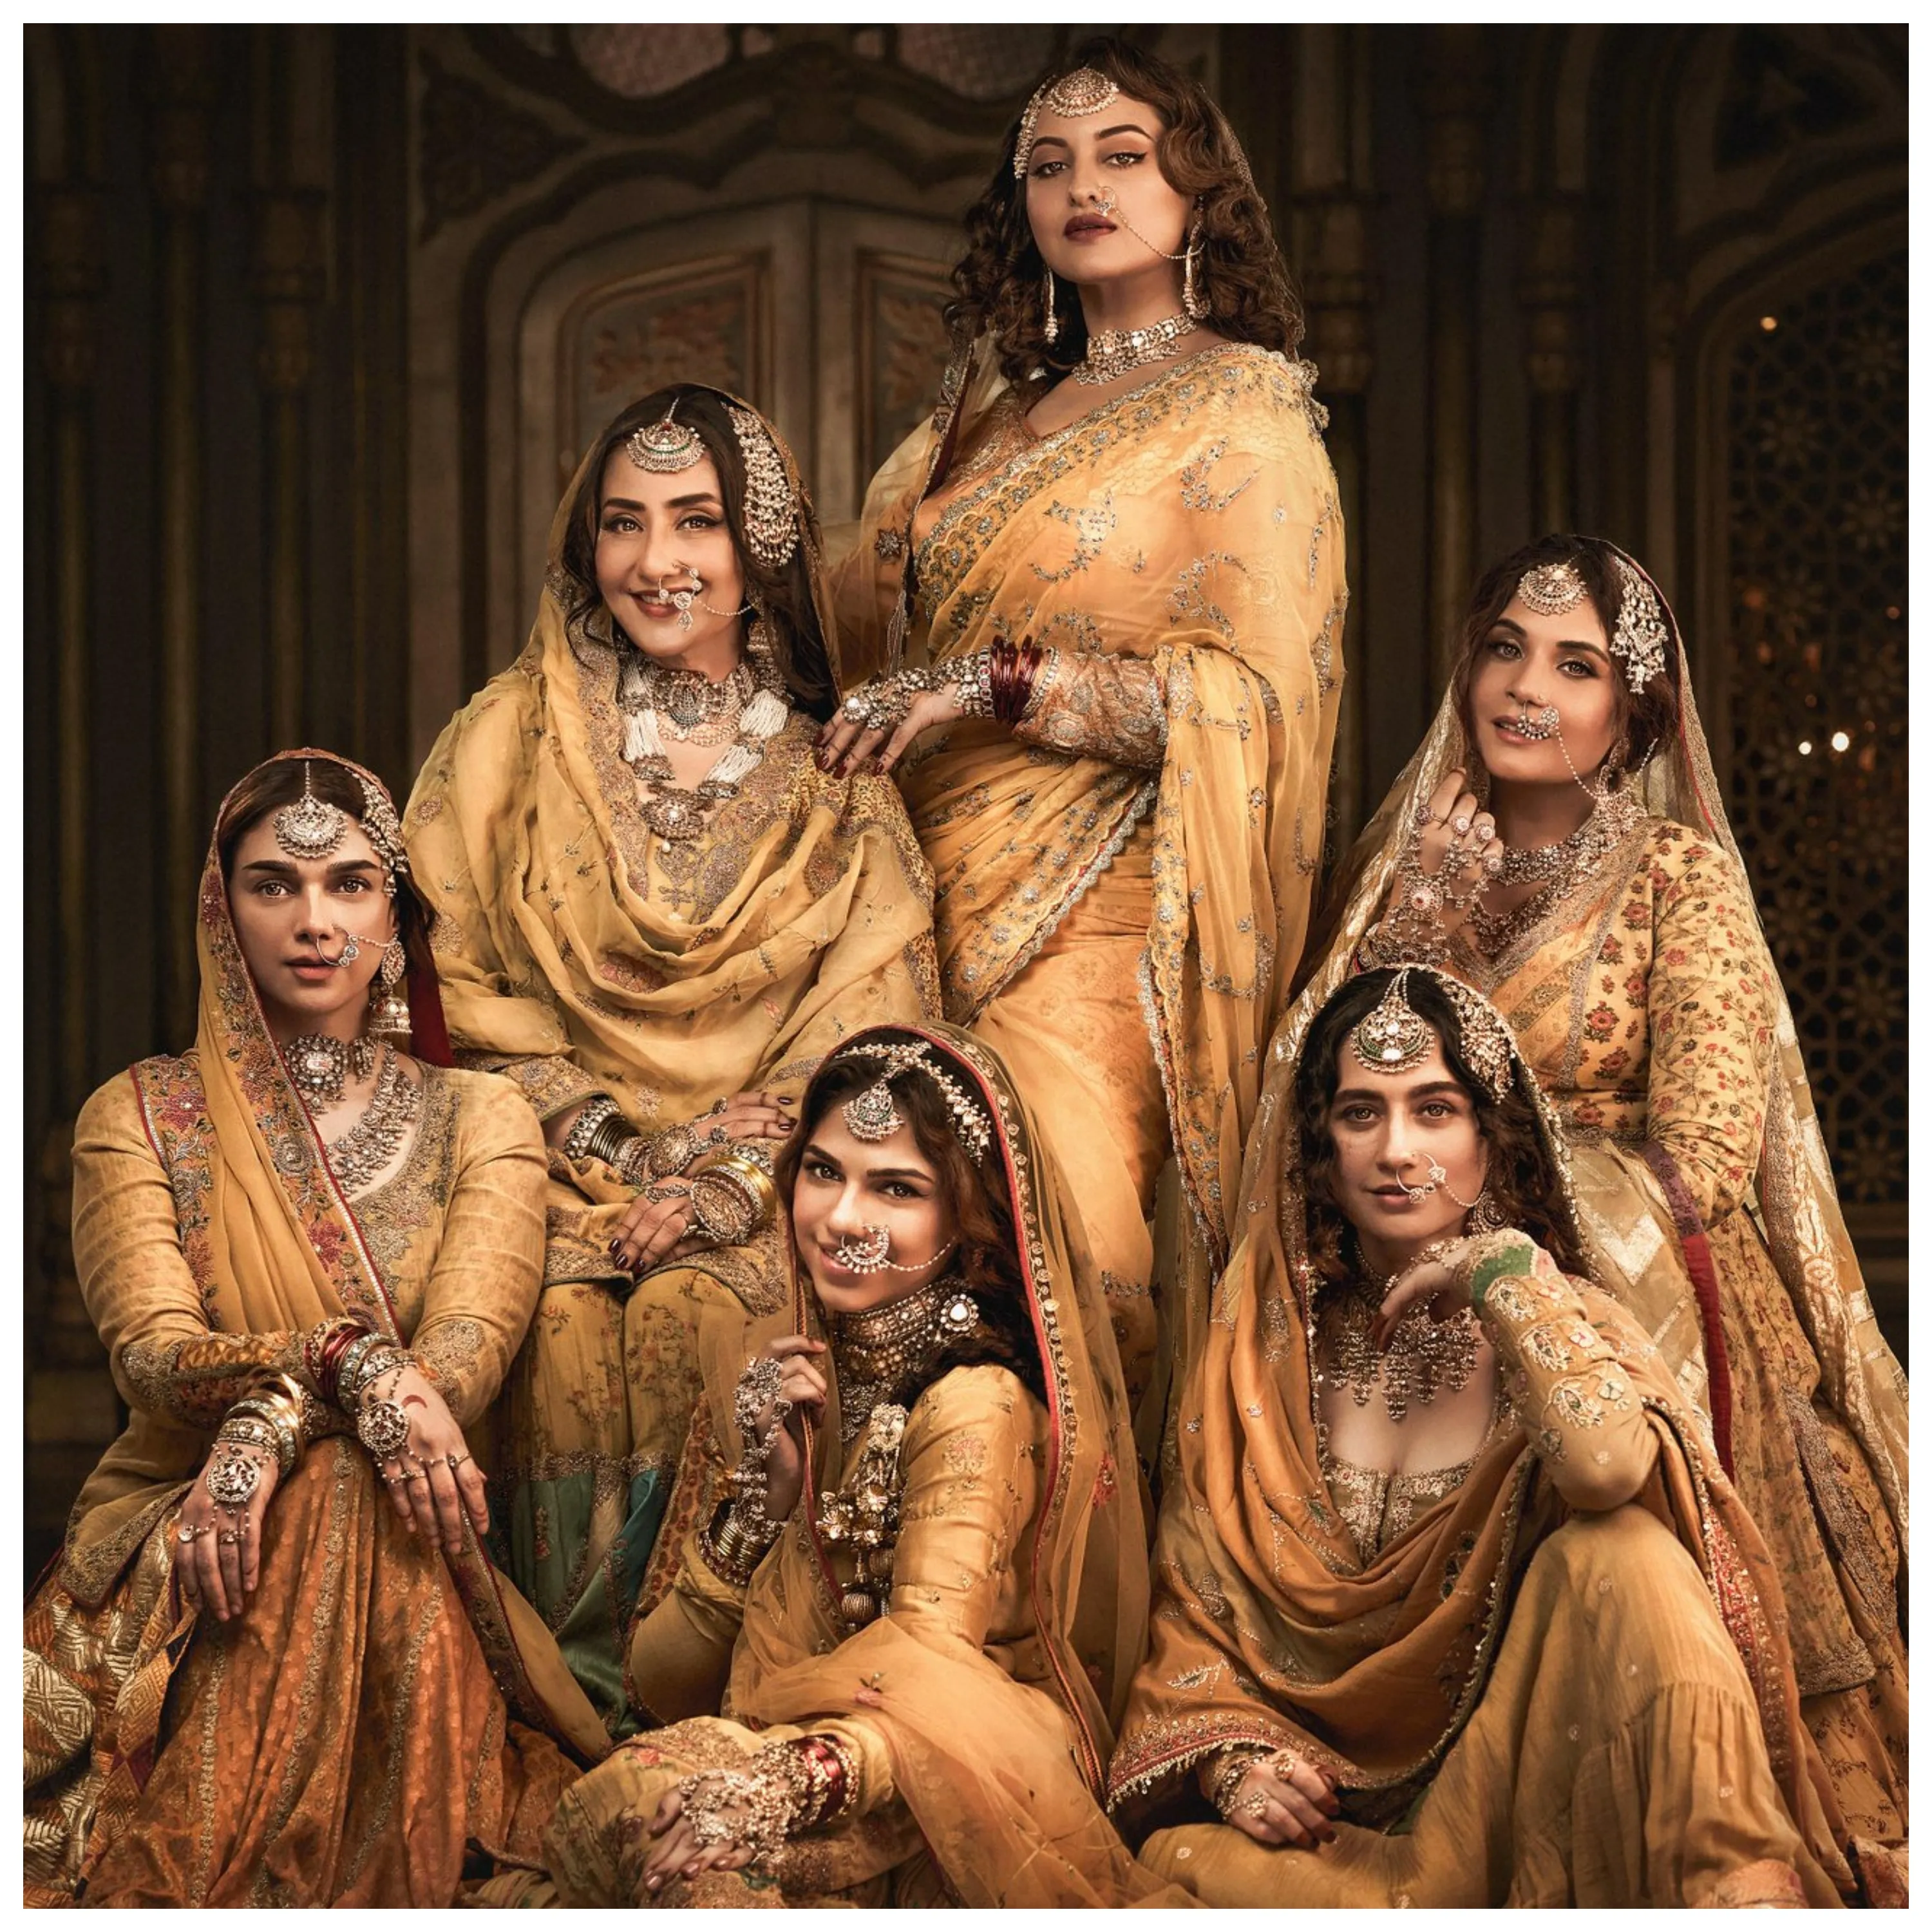 Fiery, feminine and fully realised: The women in Sanjay Leela Bhansali’s cinema are anything but girls-next-door